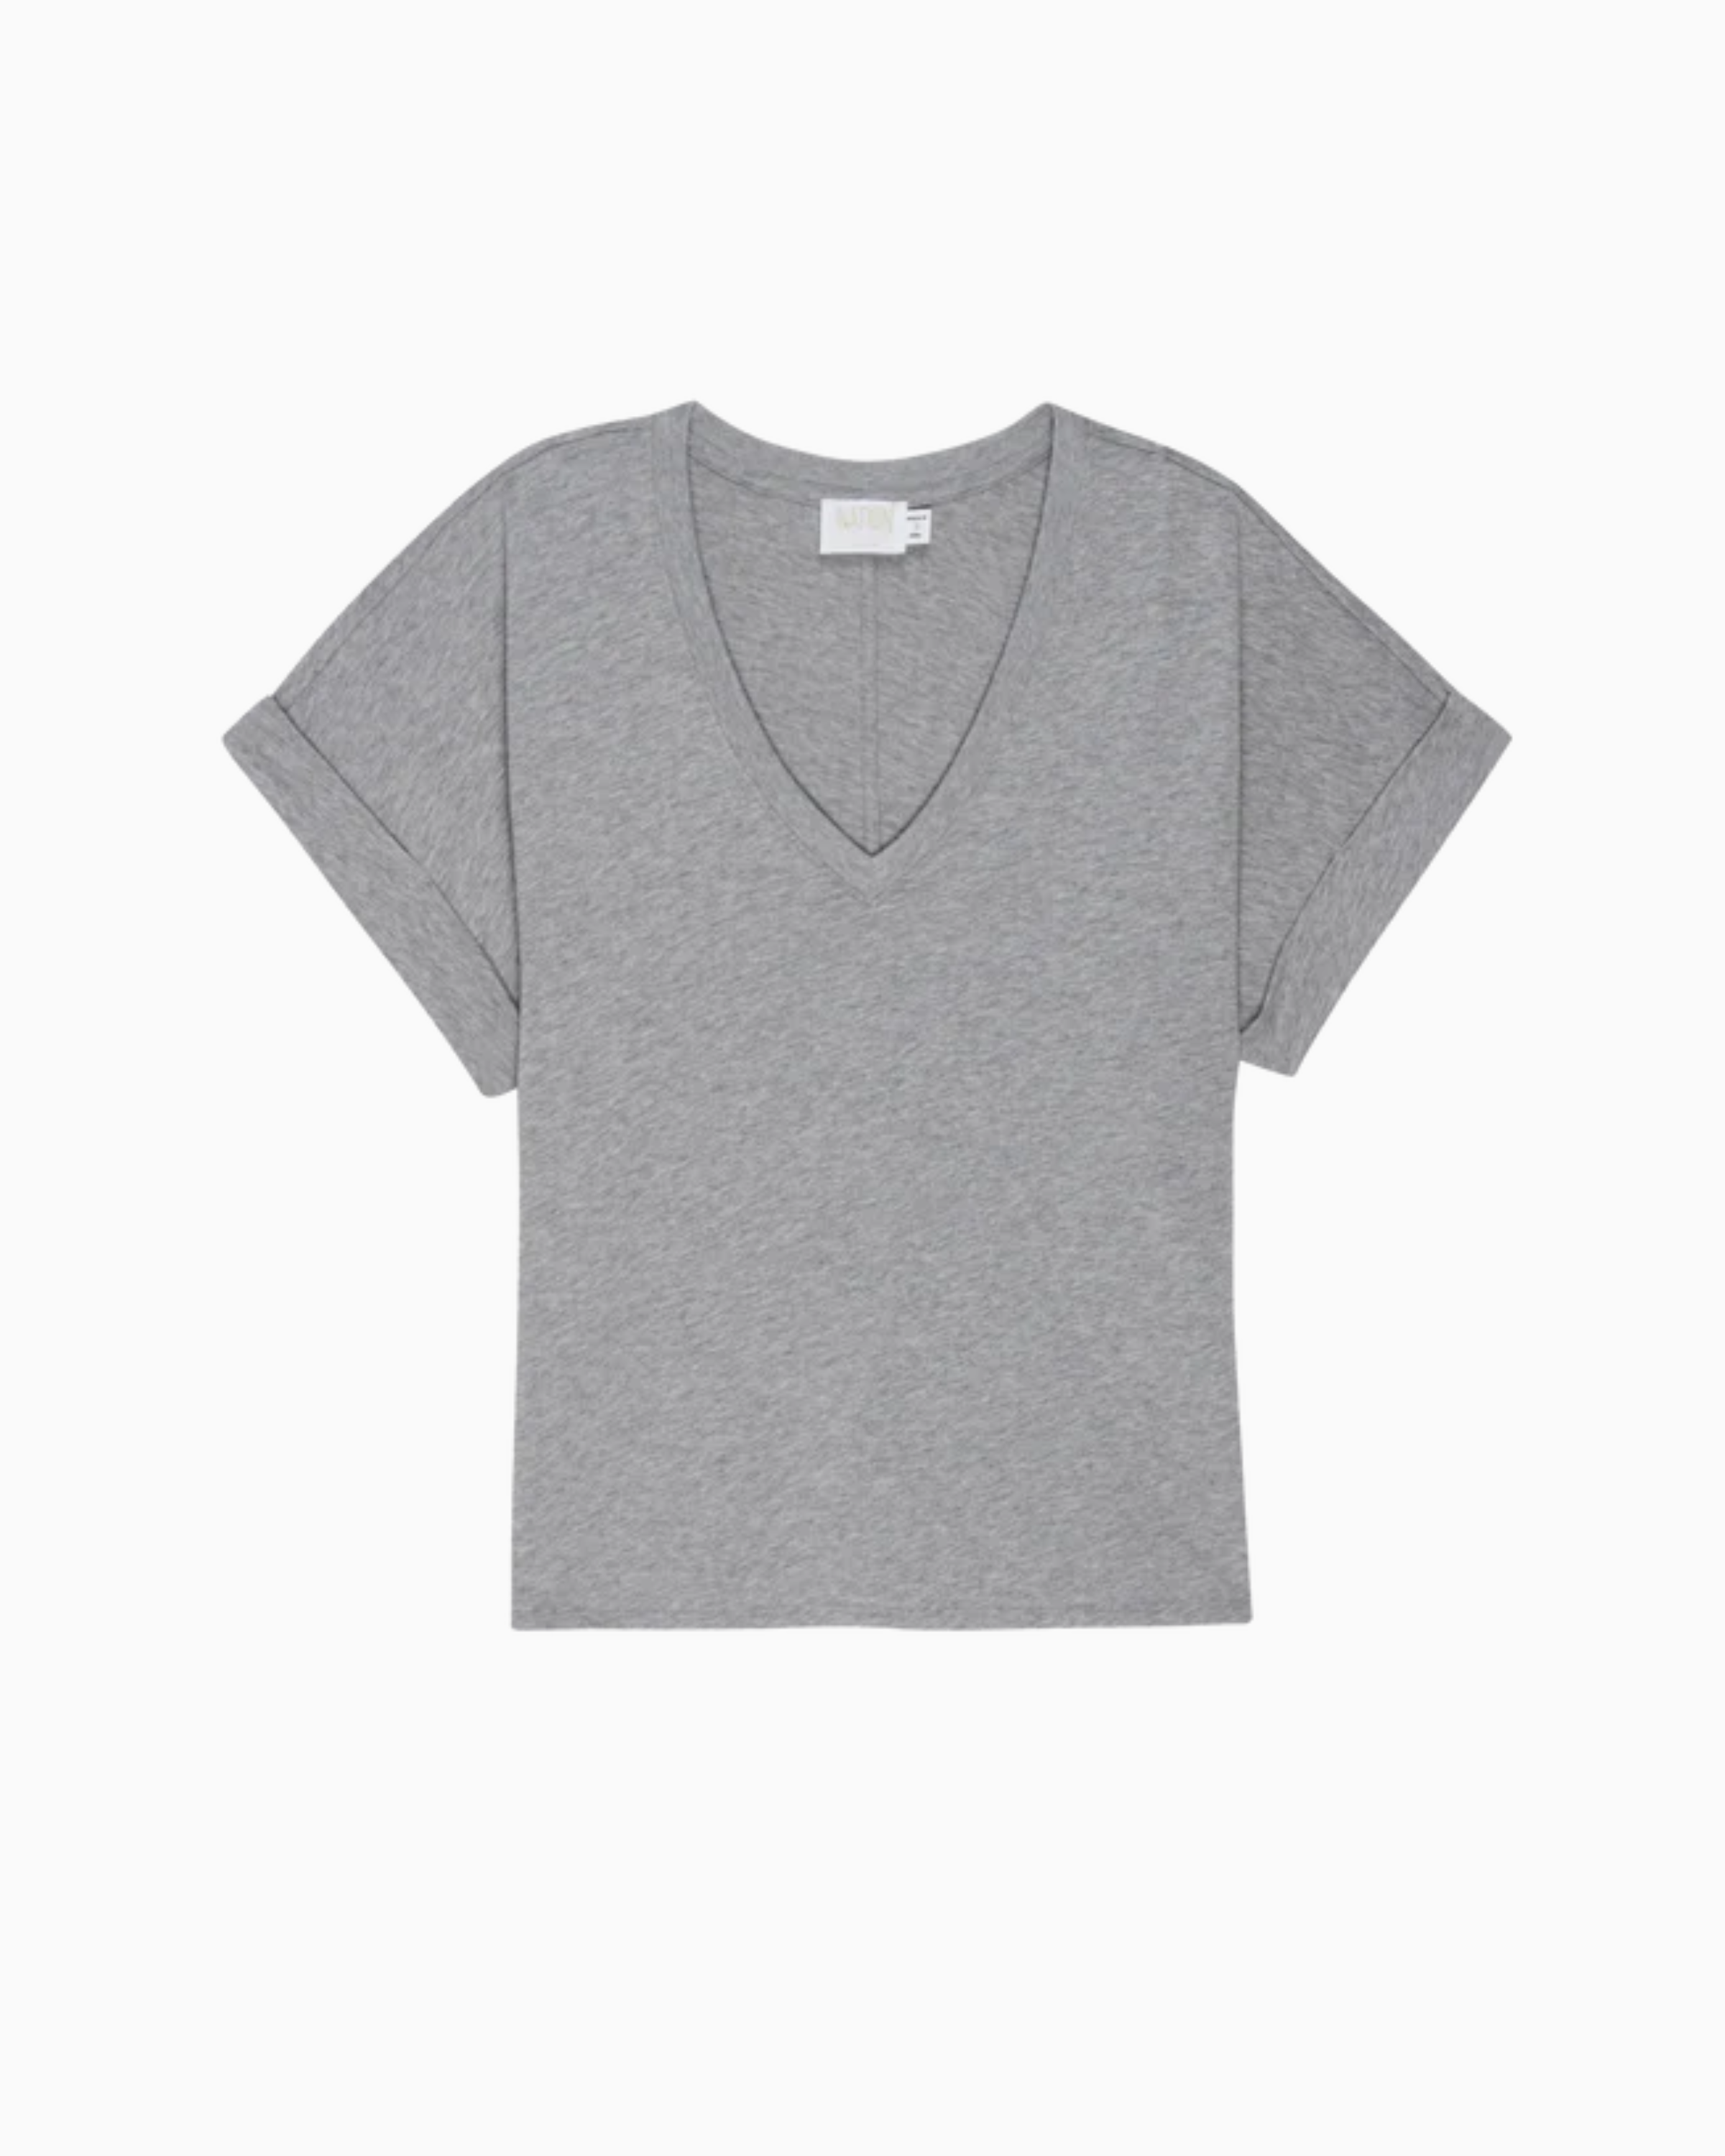 Nation Stevie Cuffed V-Neck Top in Heather Grey